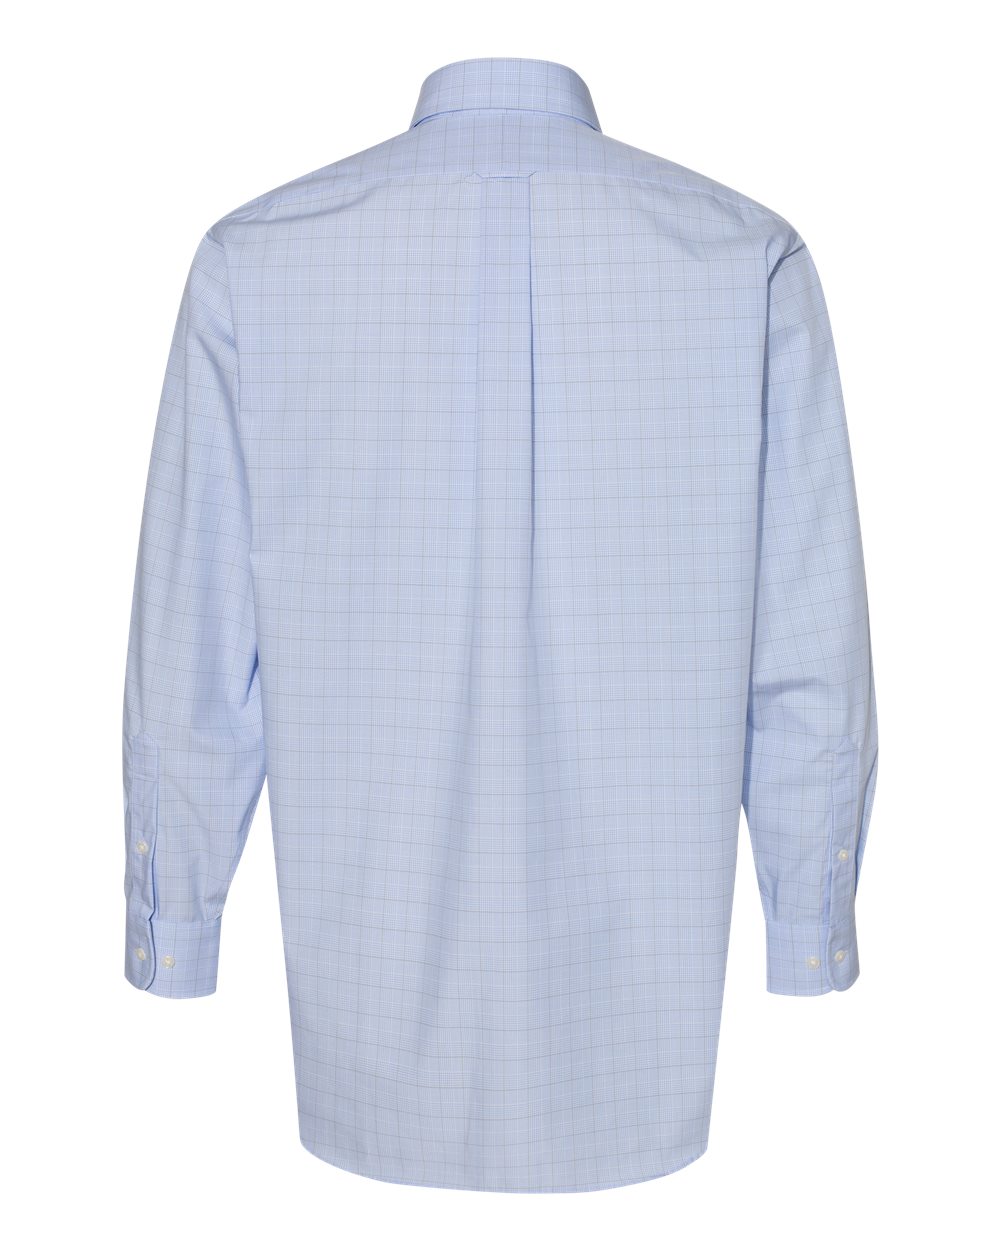 Blue Suitings Non-Iron Patterned Shirt - 13V0467-